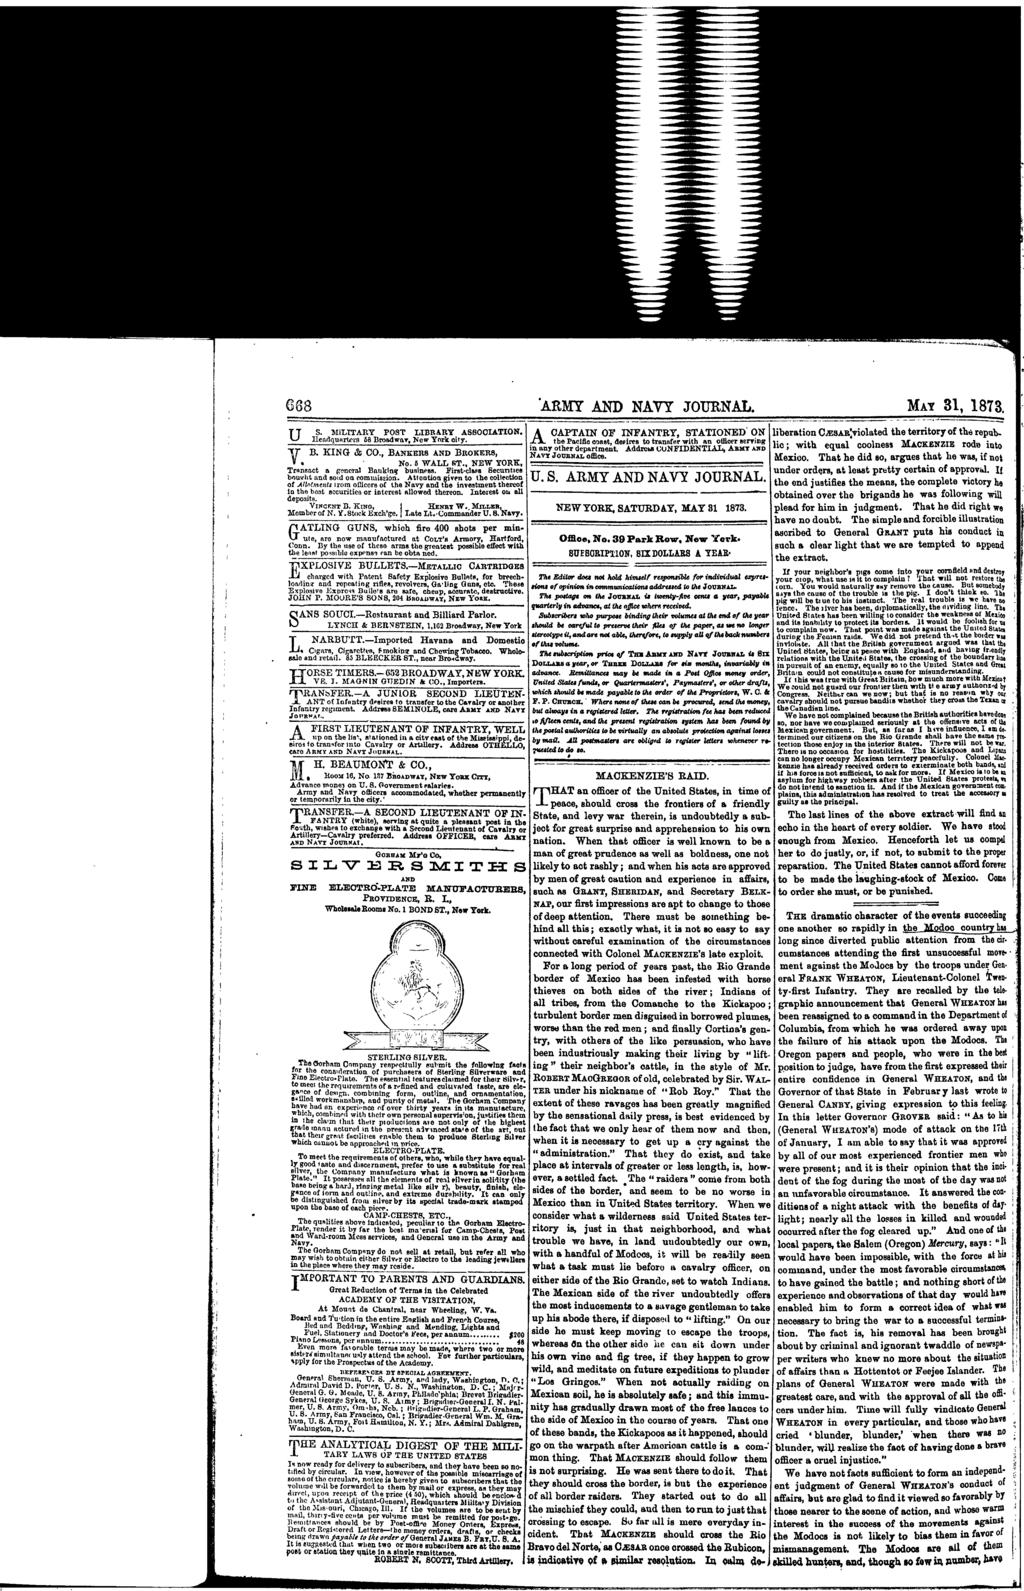 668 ARMY AND NAVY JOURNAL. MAY 31, 1873. US. MiLTARY POST LBRARY ASSOCATON. fhedqurters 00 Brodwy, Nw York city. V B. KNG CO., BANKERS AND BROKERS, V. * ' No. 5 WALL ST.